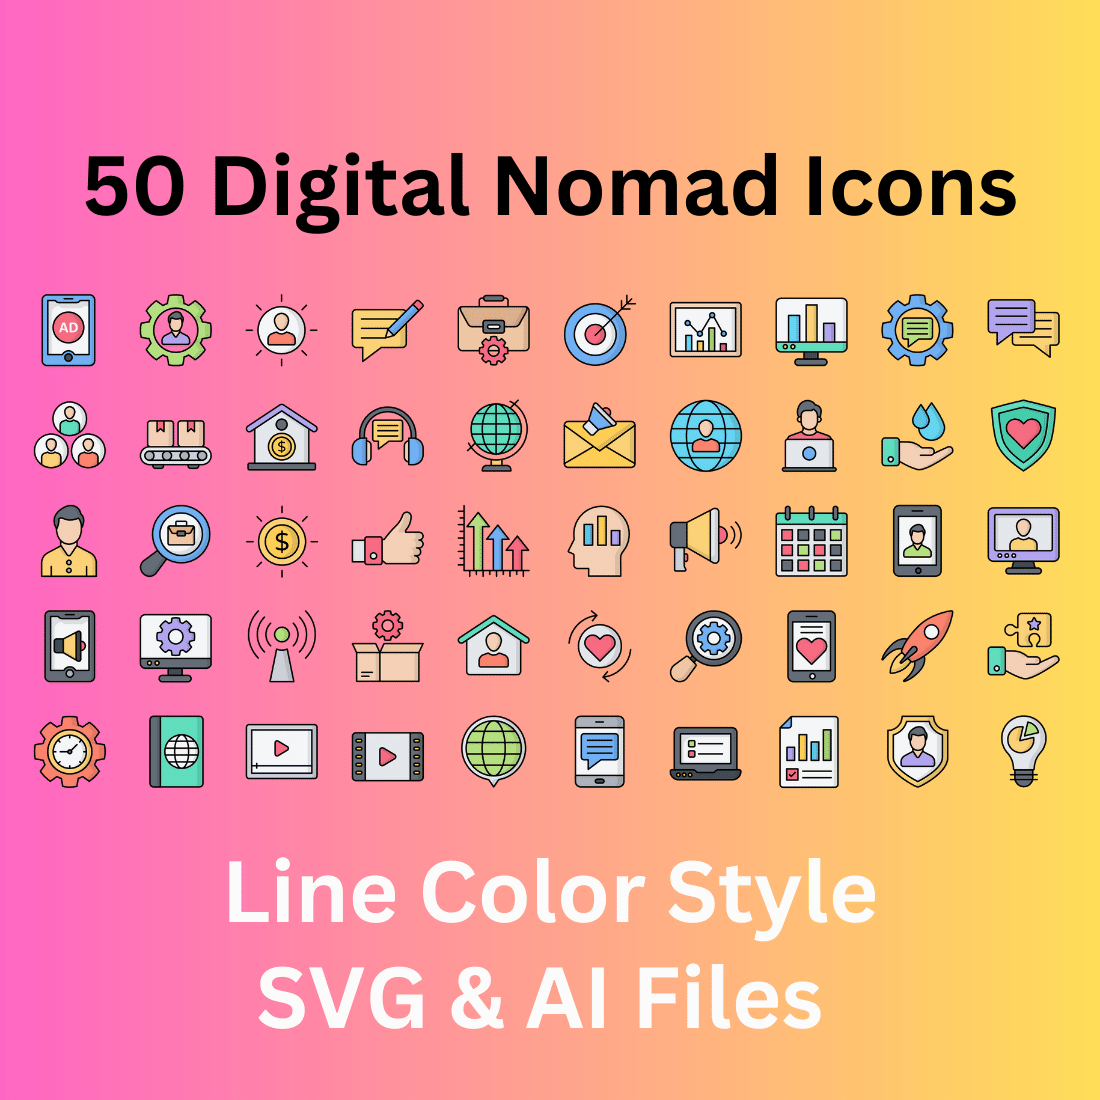 Digital Nomad Icon Set 50 Line Color Icons - SVG And AI Files cover image.